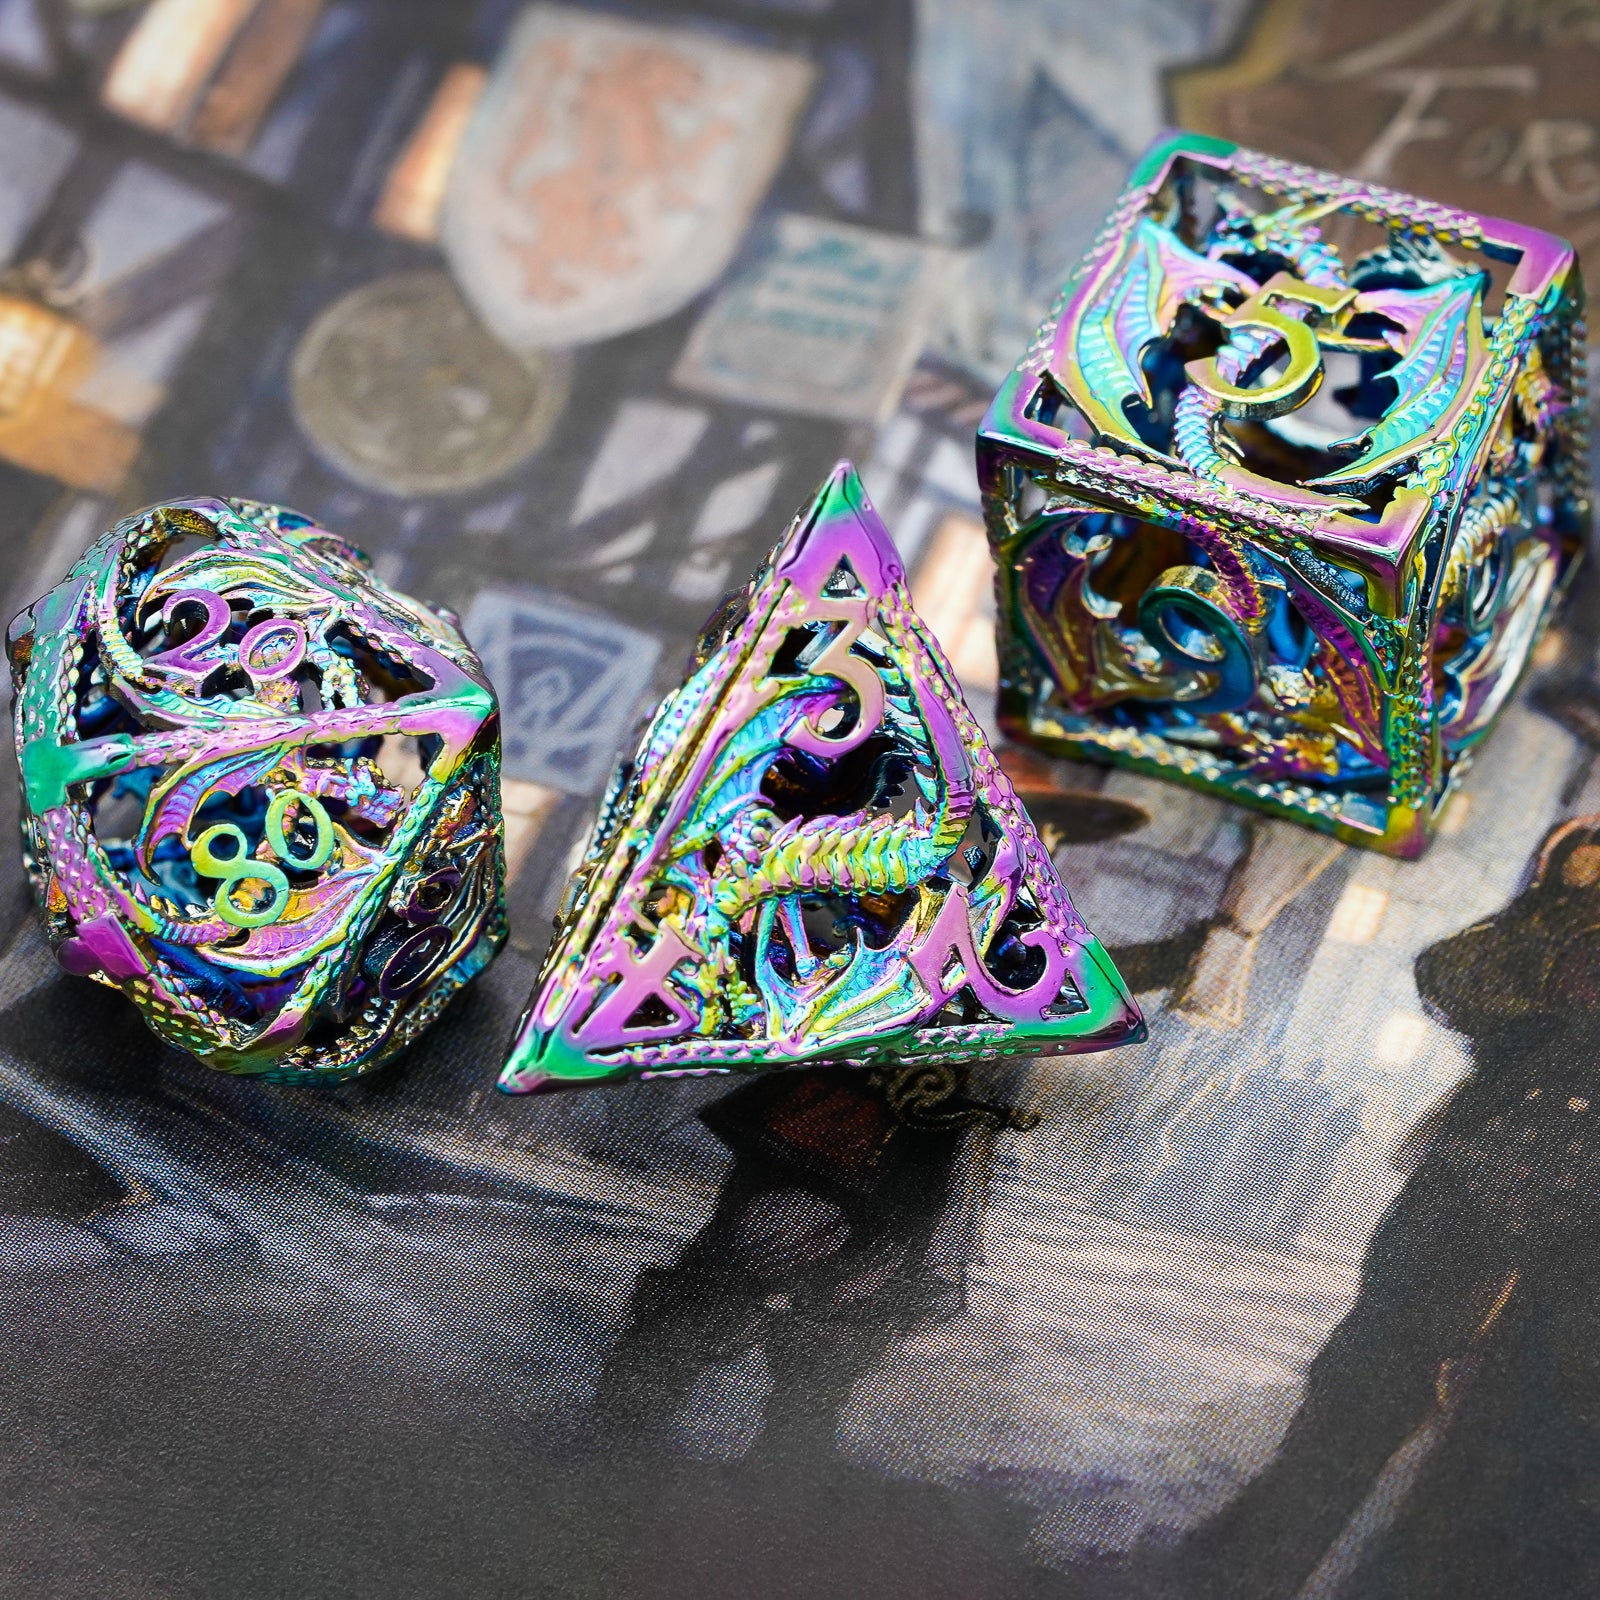 d4, d6 and percentage dice on city street background